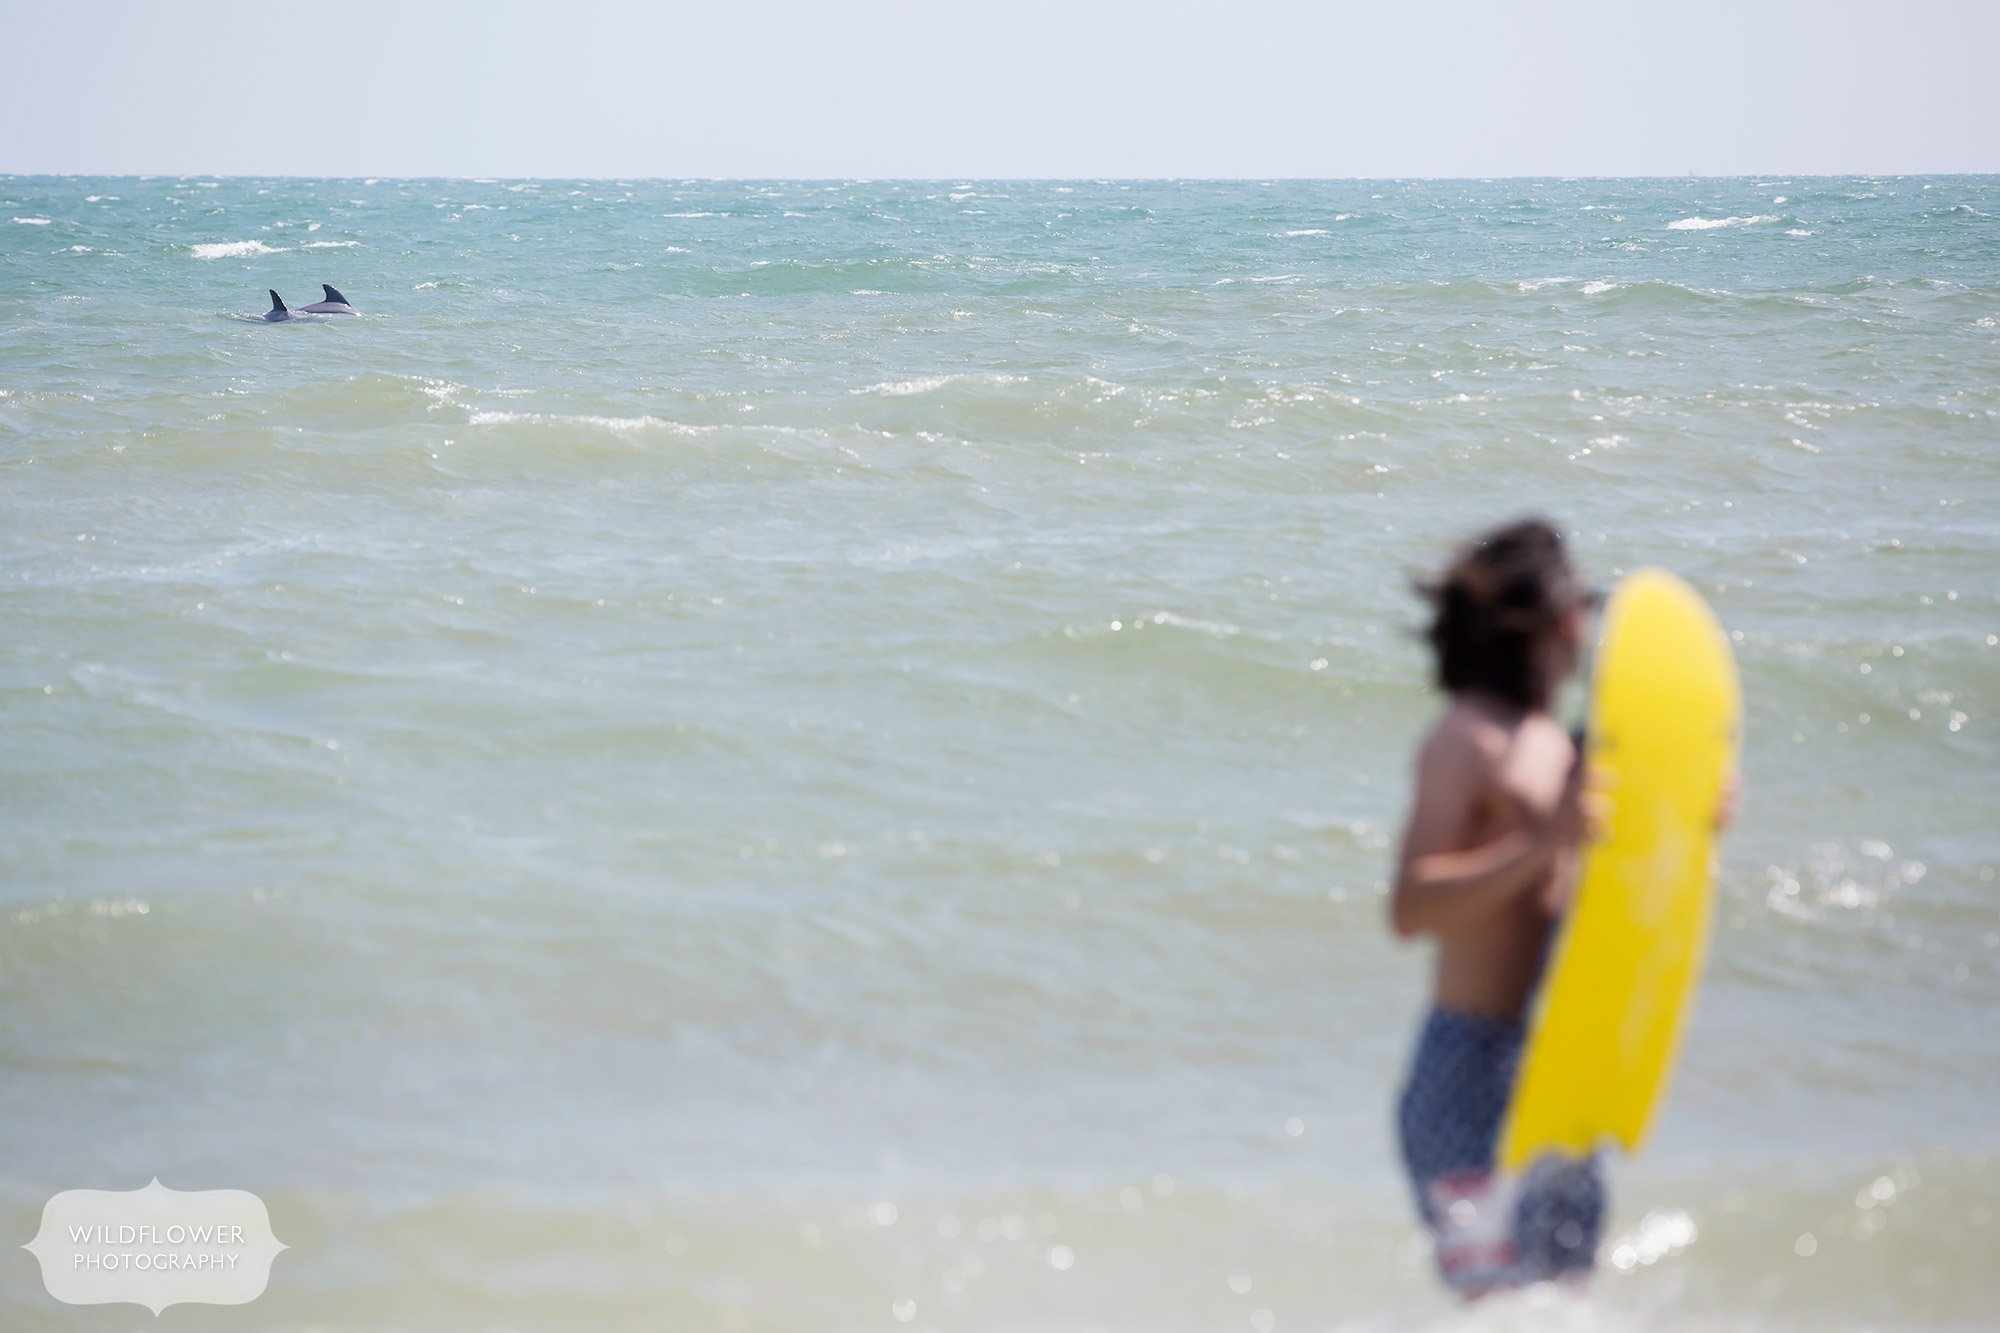 A man holds a boogie board on St. George Island while dolphins swim behind him.